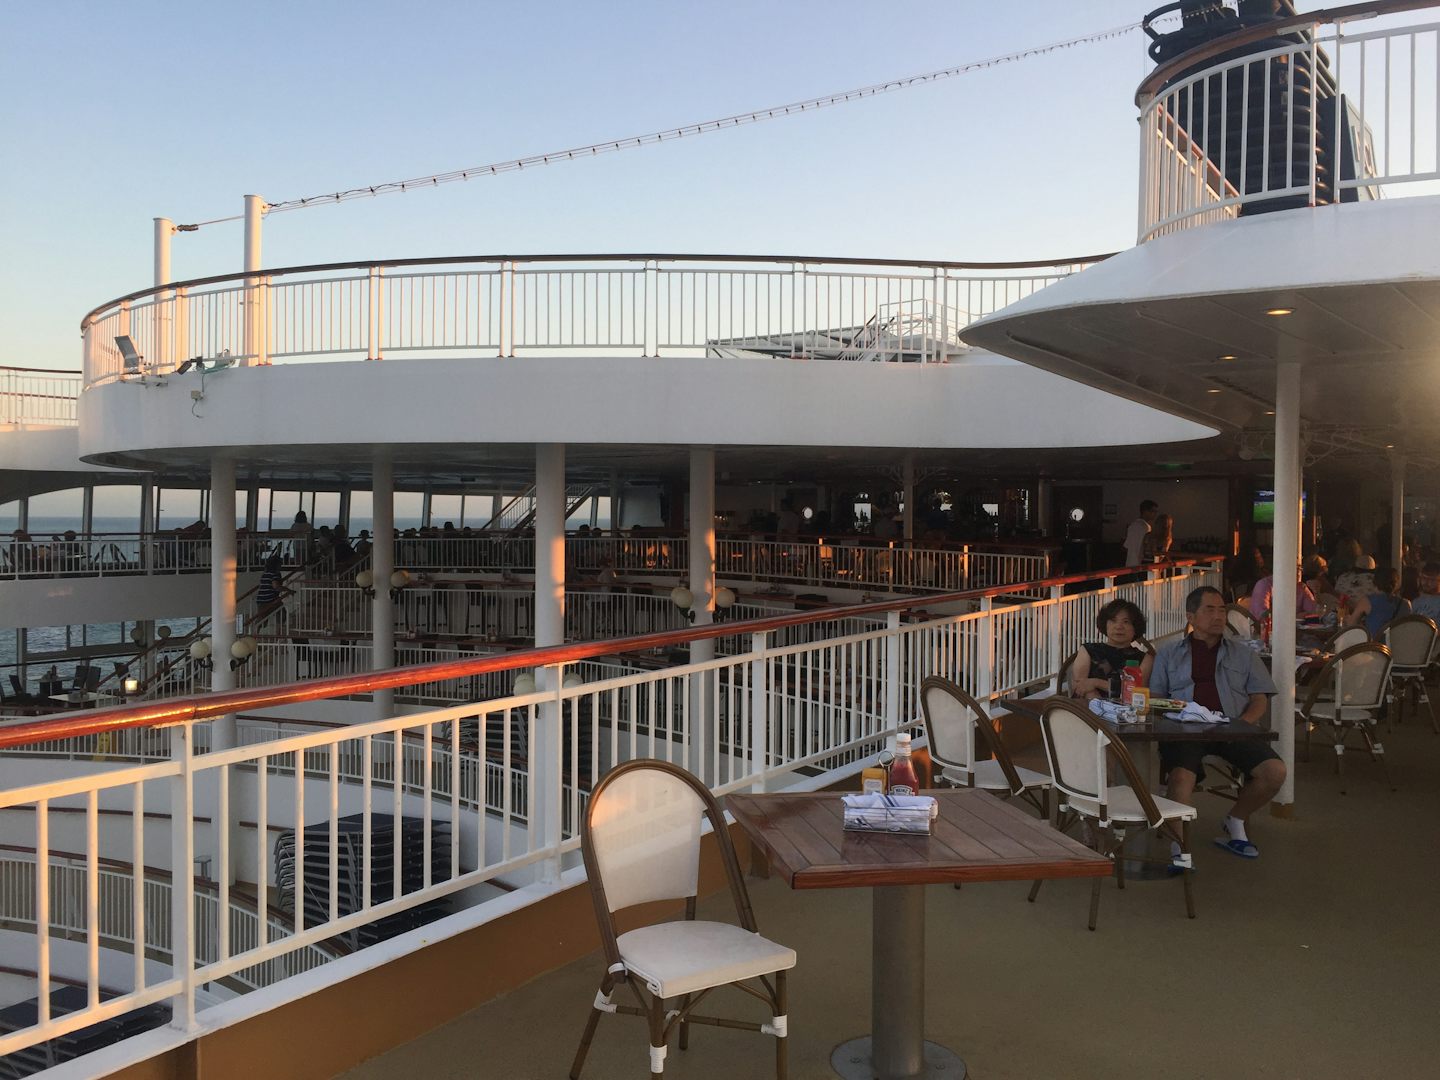 Outdoor bar and seating area on deck 12.  We ate many meals out here